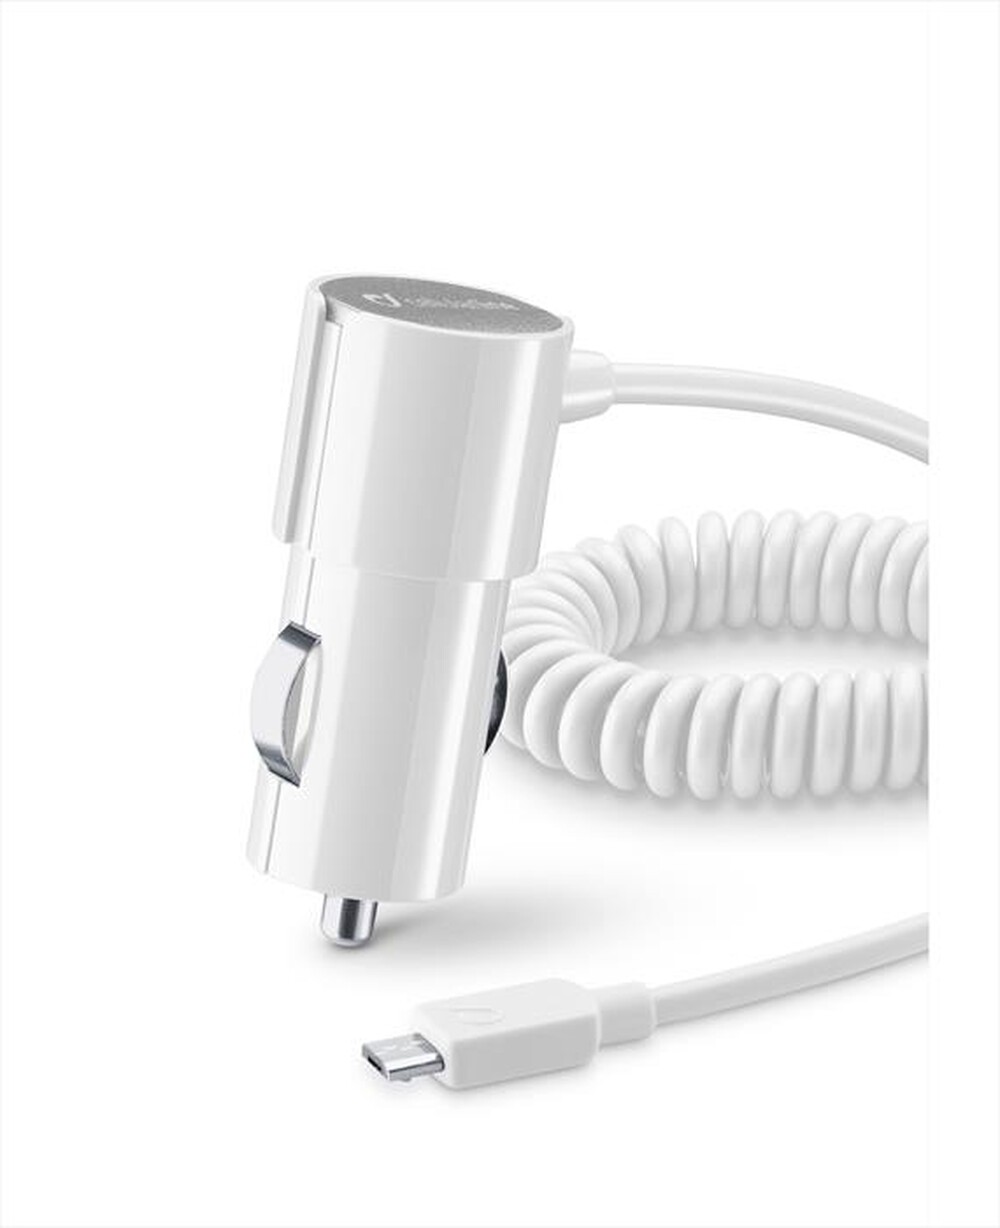 "CELLULARLINE - Car Charger Stylecolor Micro USB - Bianco"